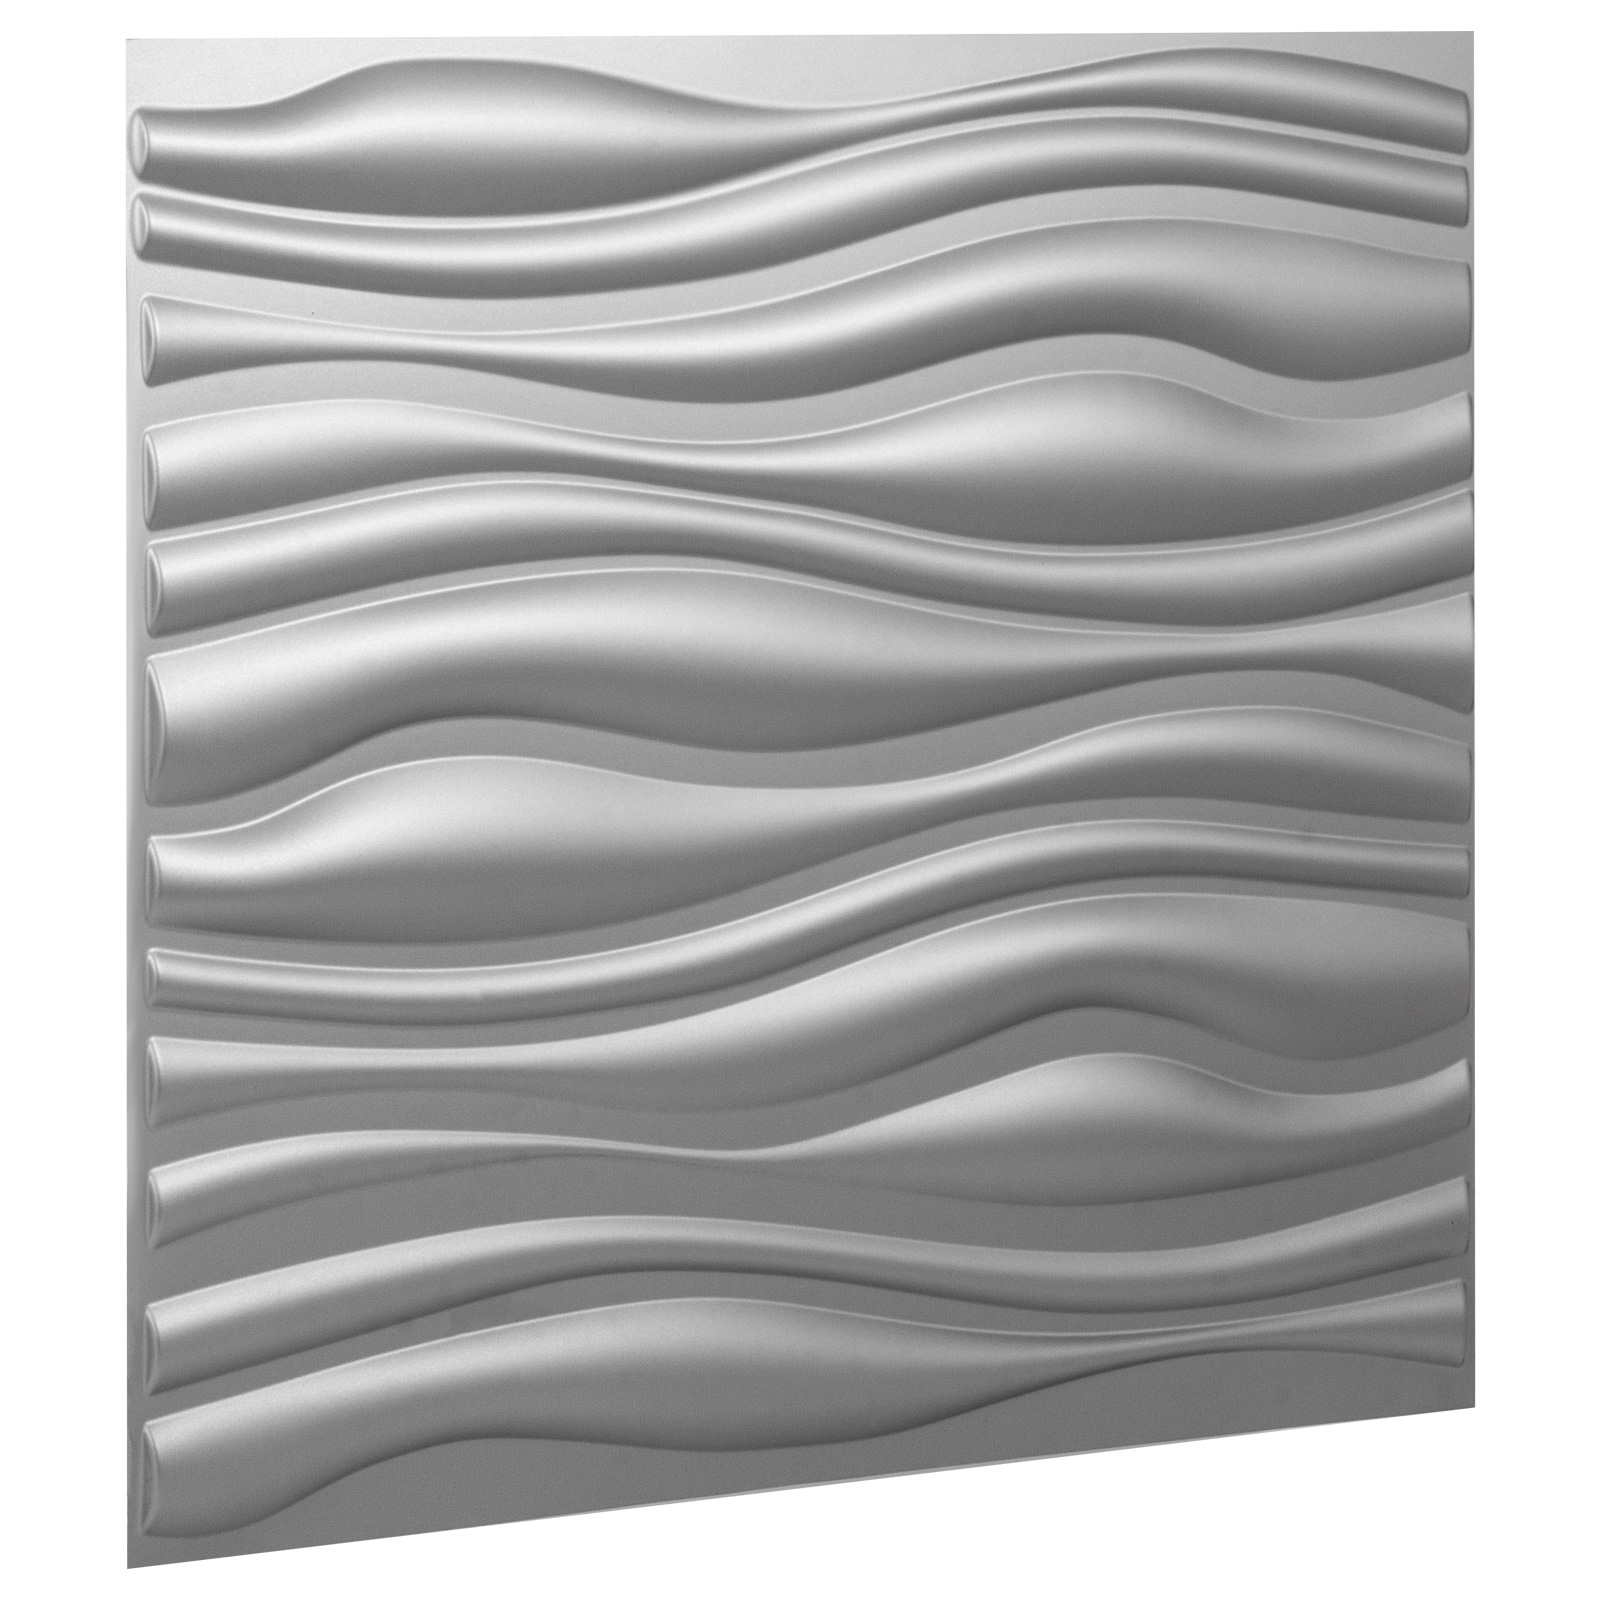 Details about   PVC 3D Wall Panels 13 Pack Water-Proof Cuttable White Brick Design 19.7"x19.7" 